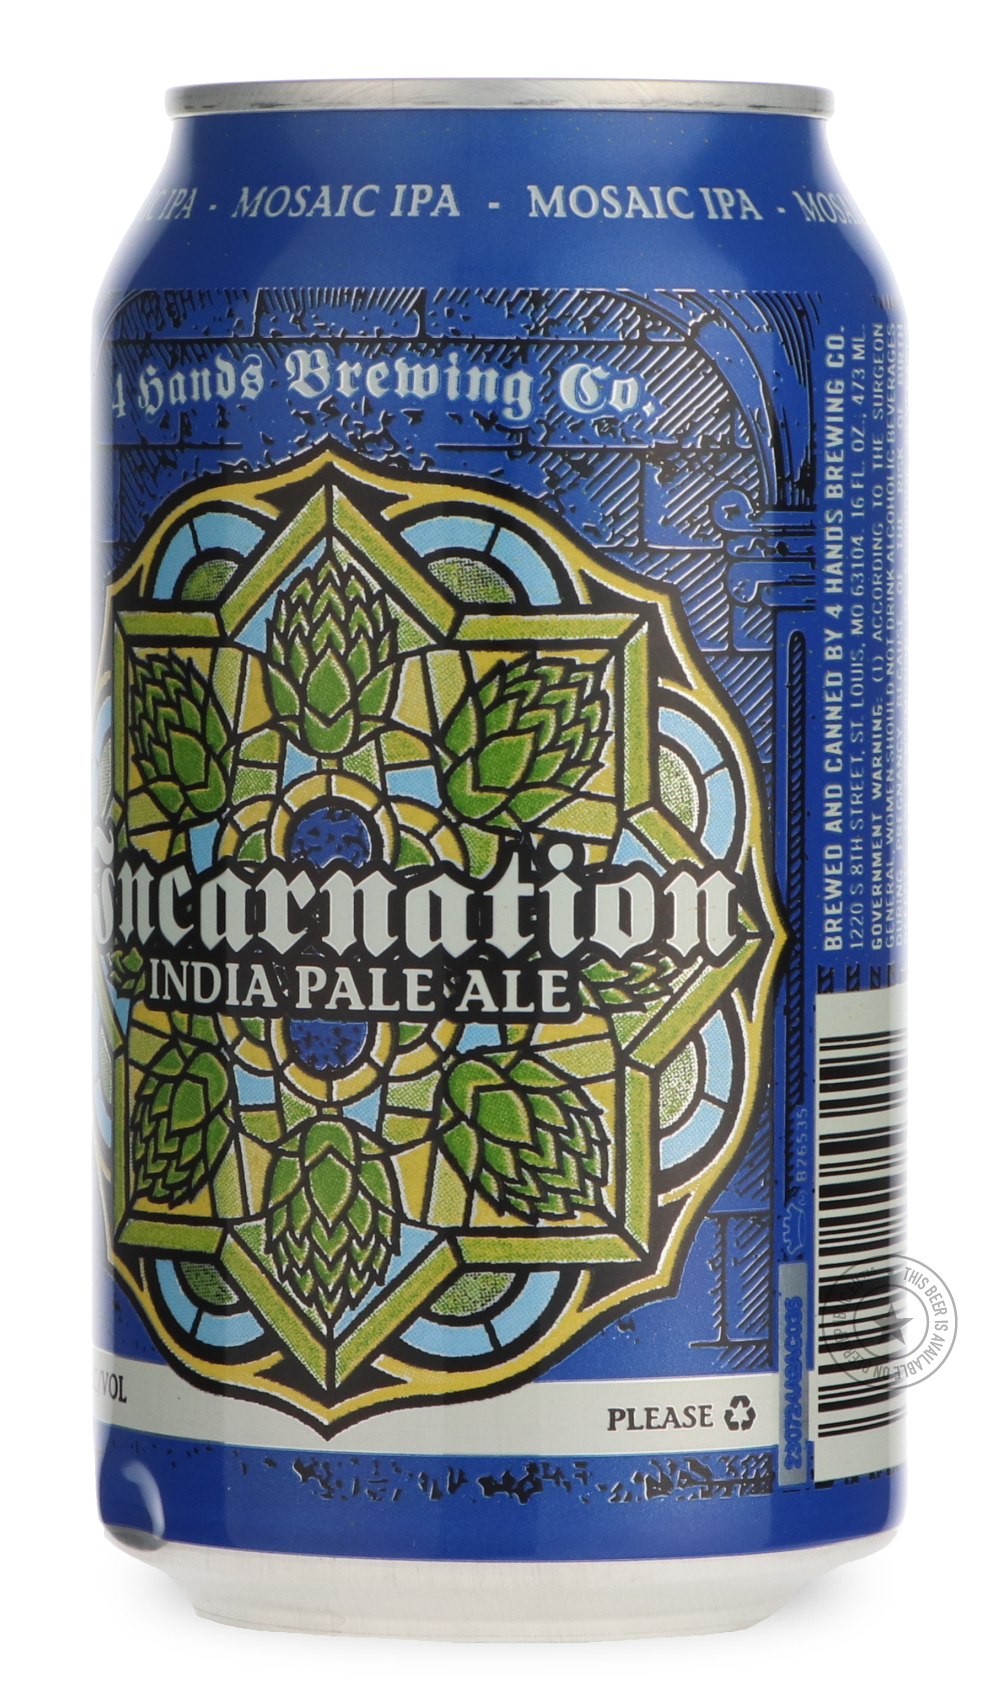 -4 Hands- Incarnation-IPA- Only @ Beer Republic - The best online beer store for American & Canadian craft beer - Buy beer online from the USA and Canada - Bier online kopen - Amerikaans bier kopen - Craft beer store - Craft beer kopen - Amerikanisch bier kaufen - Bier online kaufen - Acheter biere online - IPA - Stout - Porter - New England IPA - Hazy IPA - Imperial Stout - Barrel Aged - Barrel Aged Imperial Stout - Brown - Dark beer - Blond - Blonde - Pilsner - Lager - Wheat - Weizen - Amber - Barley Wine